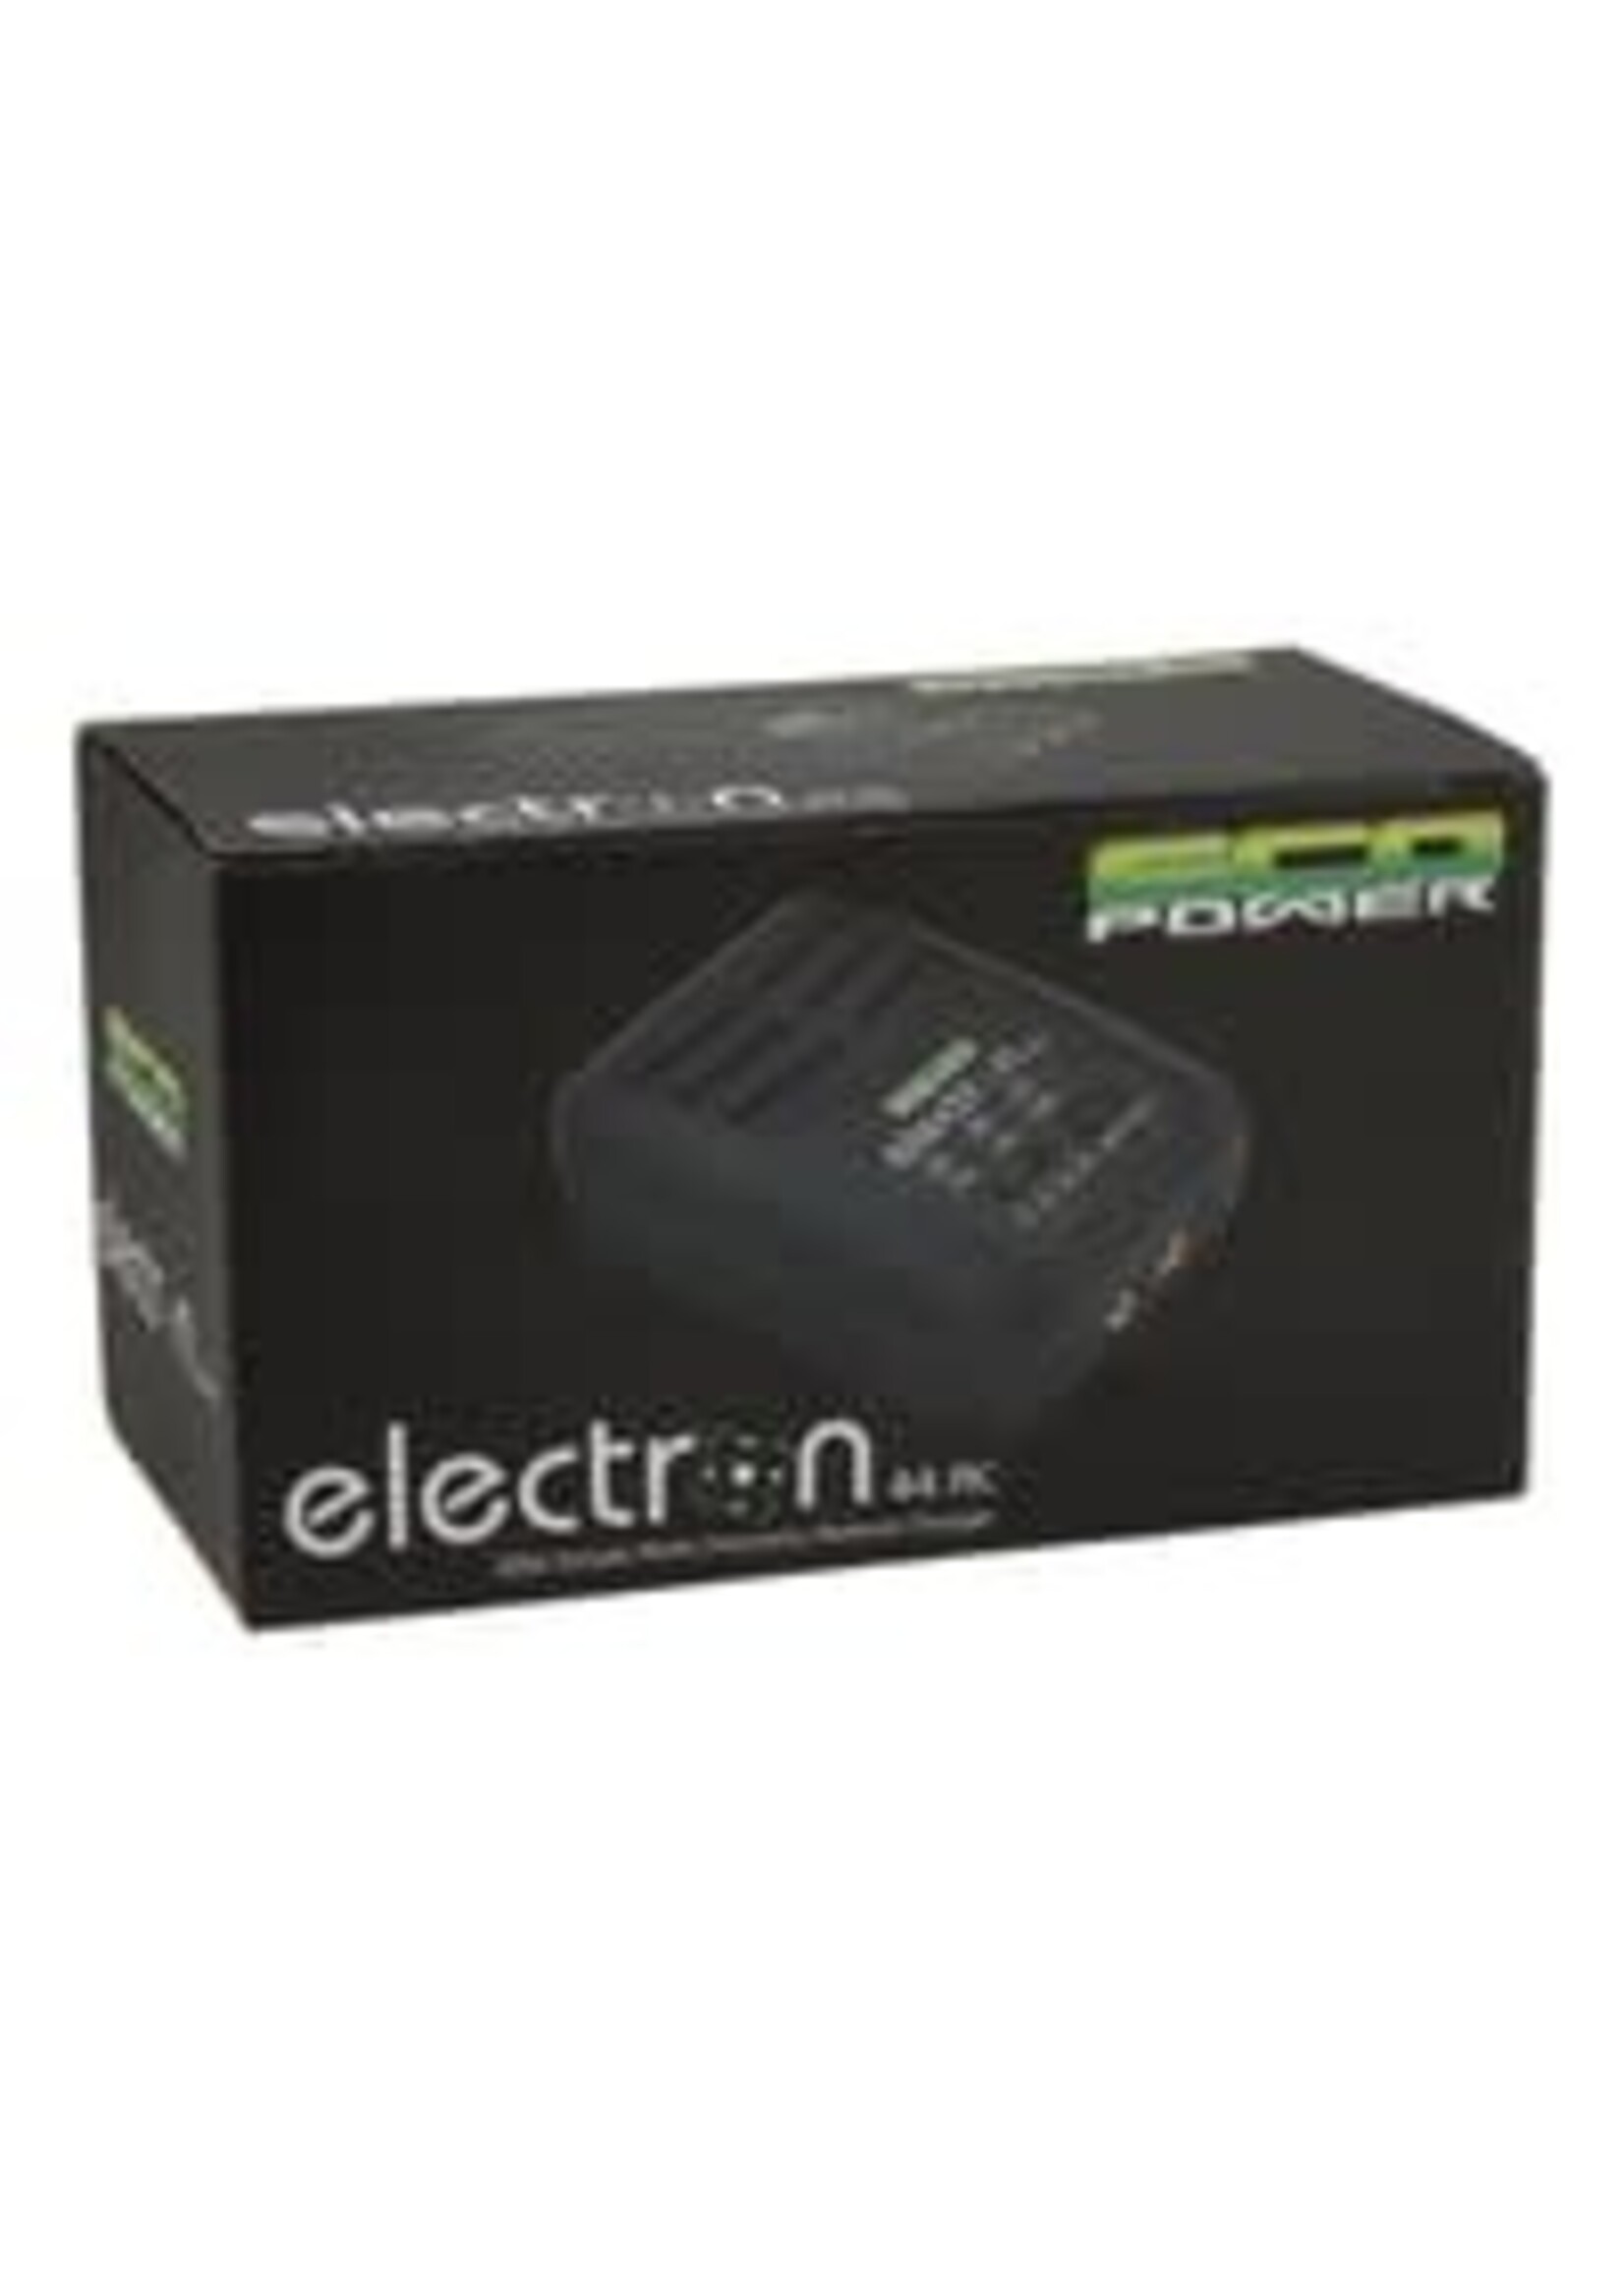 EcoPower ECP-1006 EcoPower "Electron 44 AC" LiHV/LiPo/LiFe Battery Charger (2-4S/4A/50W)